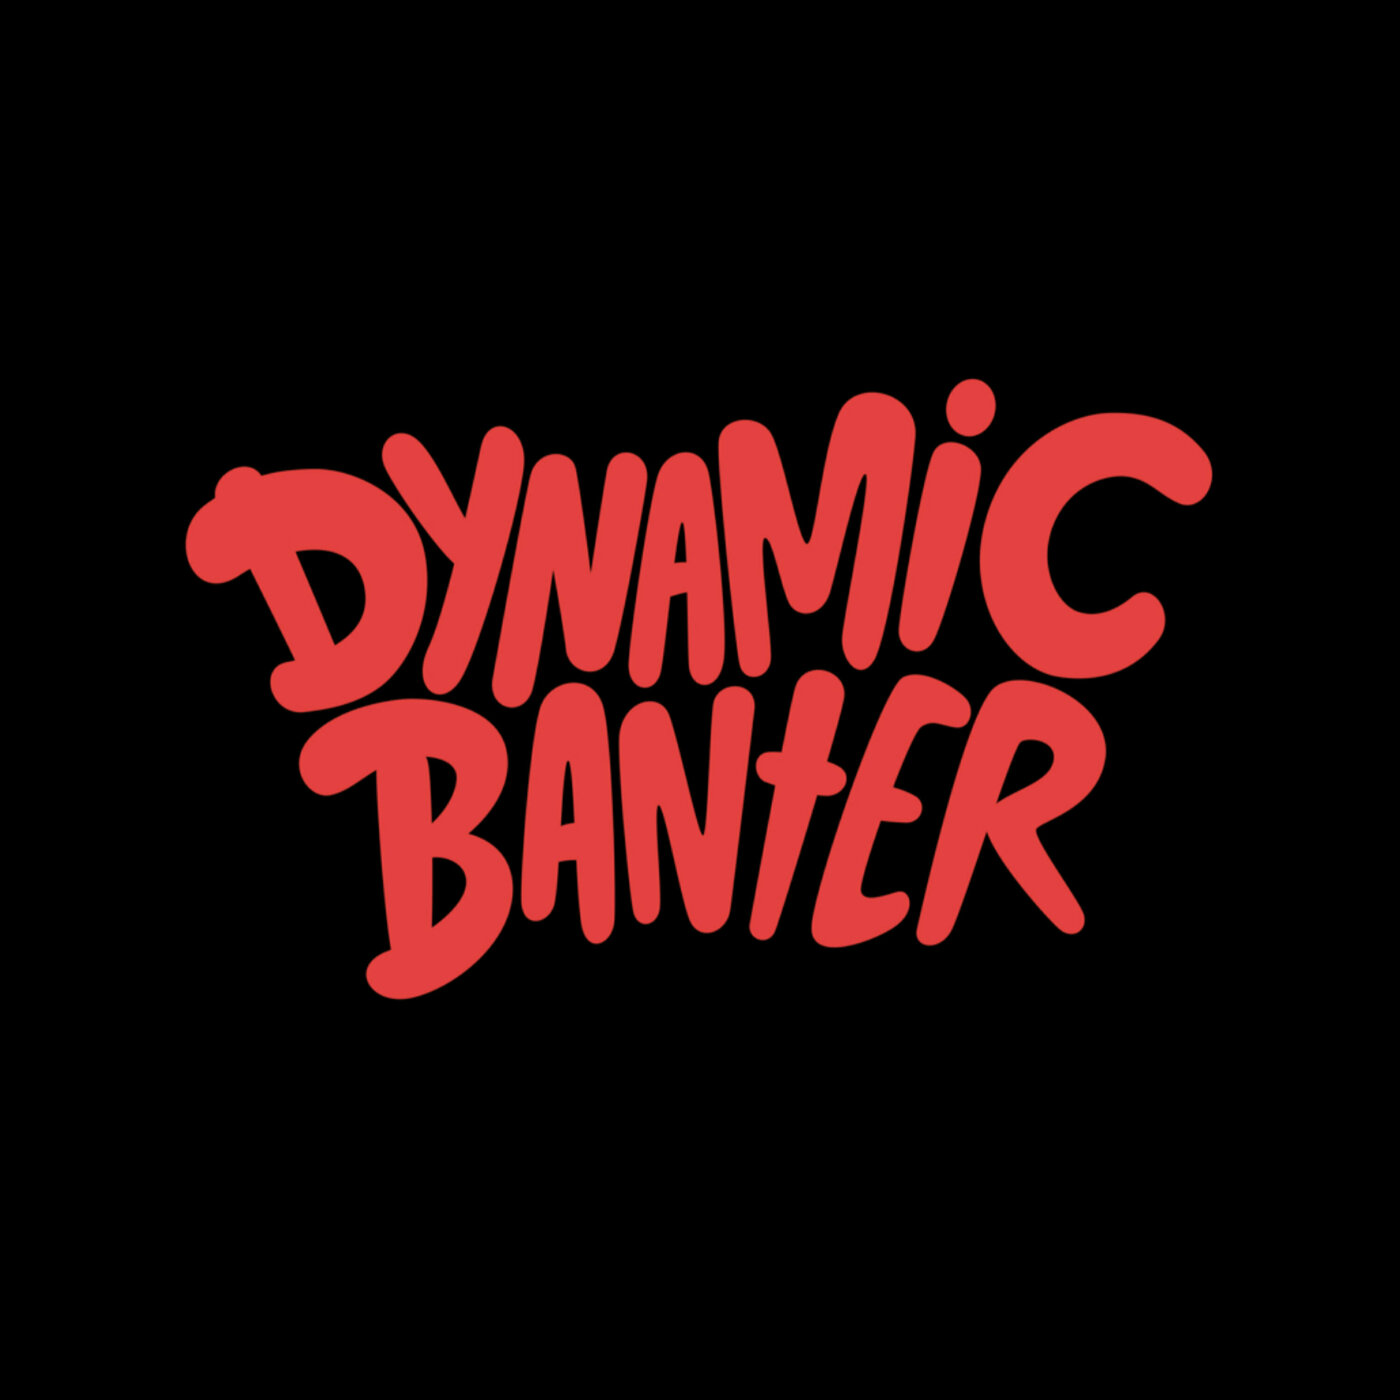 Episode 198 - The Greatest Episode of Dynamic Banter Ever